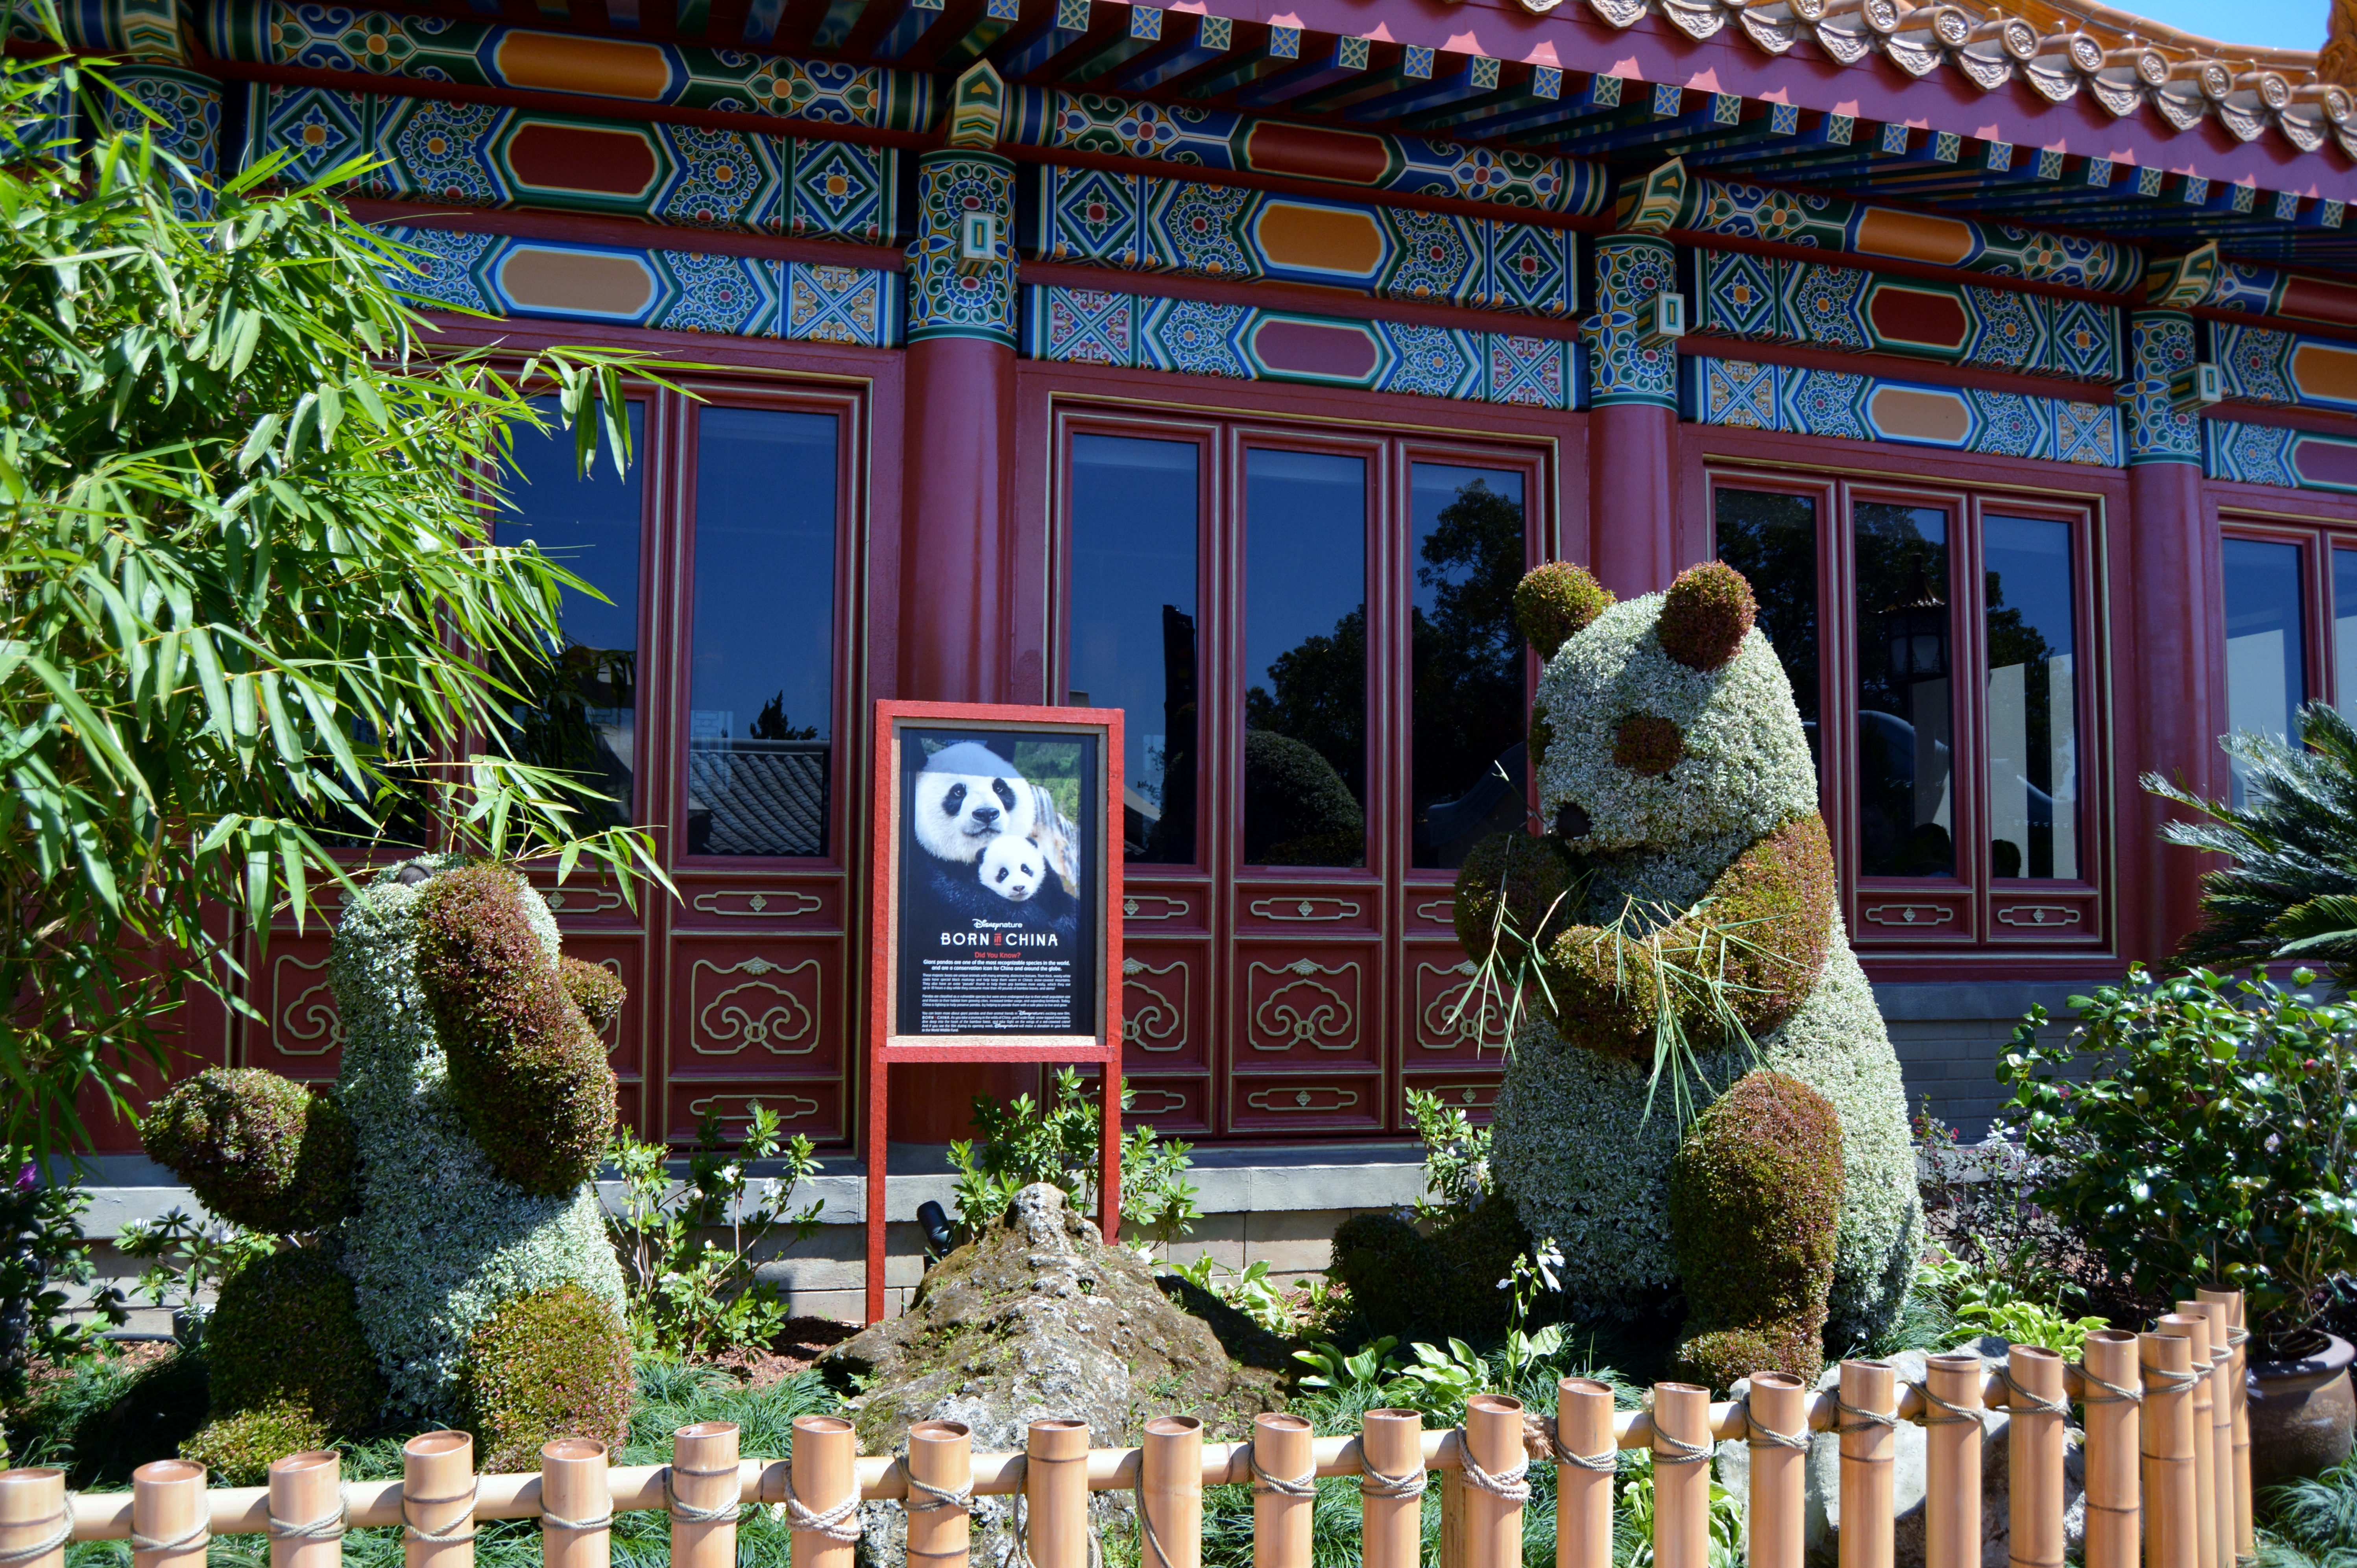 Born in China - at the Epcot Flower and Garden Festival